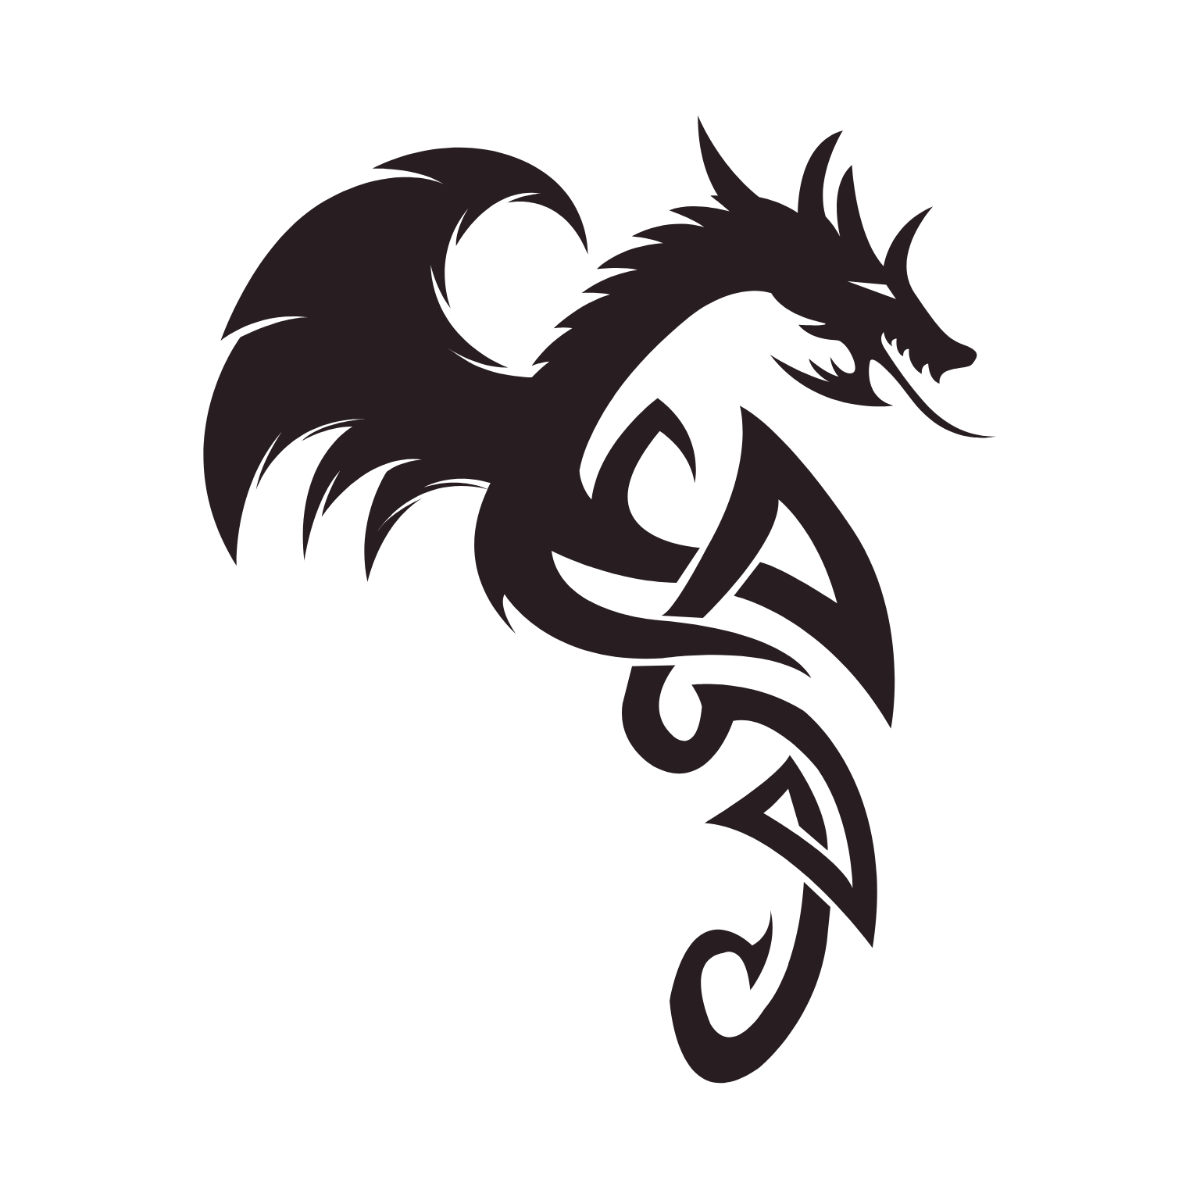 FREE Dragon Vector Templates & Examples - Edit Online & Download